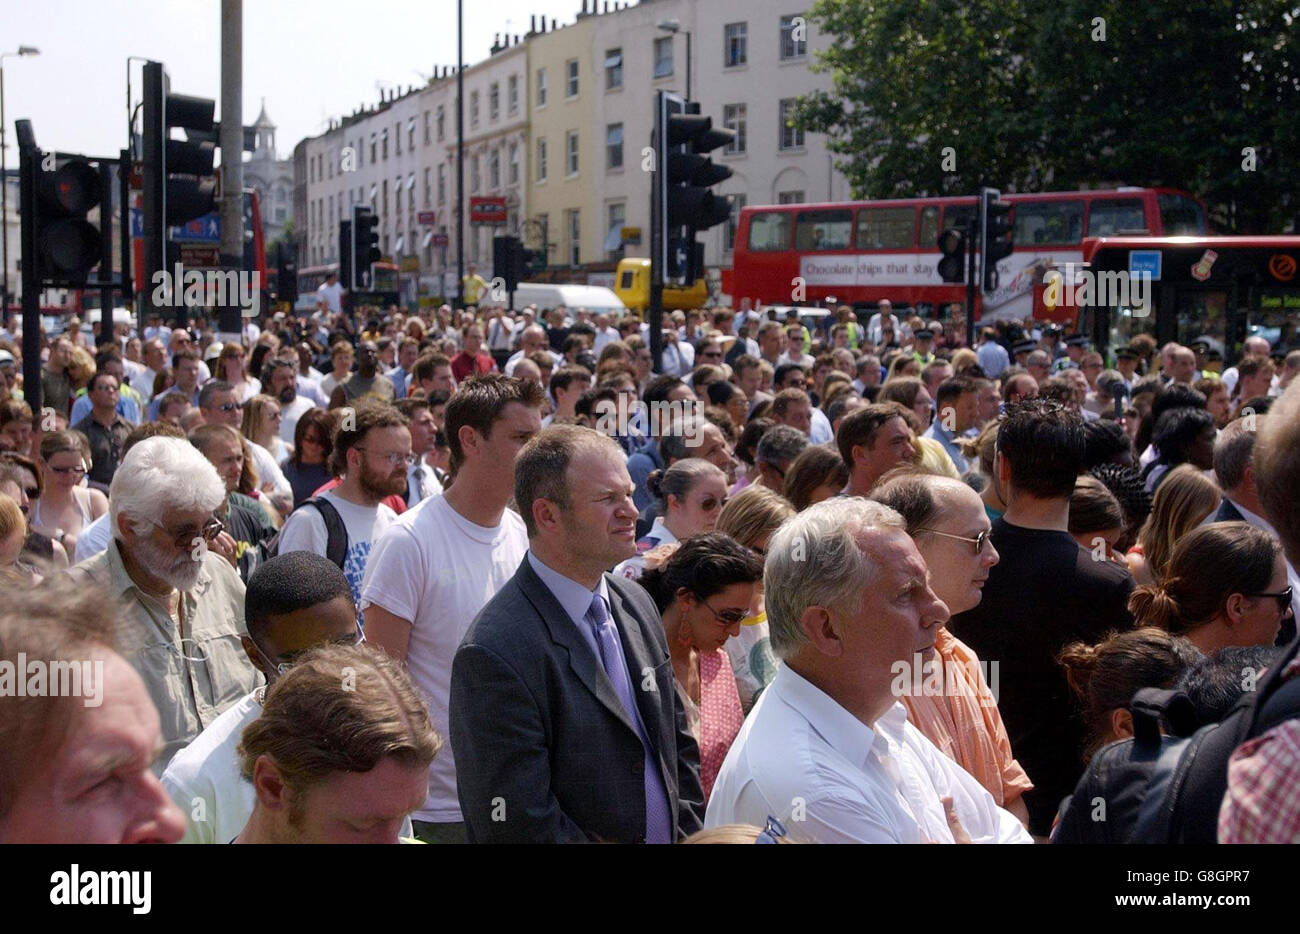 Members of the public fill the streets at the junction of Euston Road and Gray's Inn Road, outside London's King's Cross station during a two minute silence held across the UK in memory of the victims of last week's terror attacks on the capital which claimed 52 lives. Stock Photo